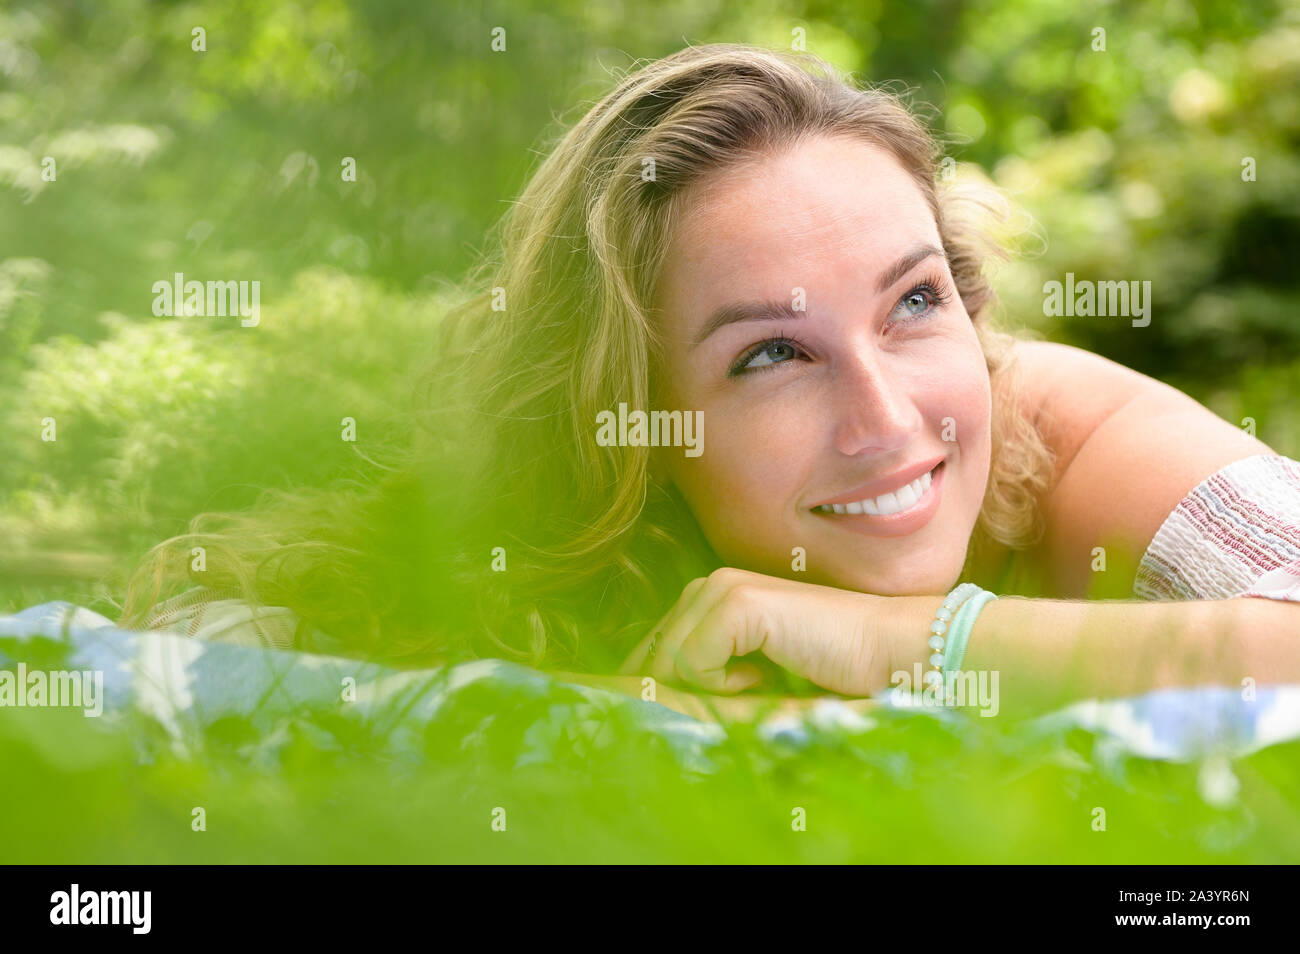 Smiling young woman lying in garden Stock Photo